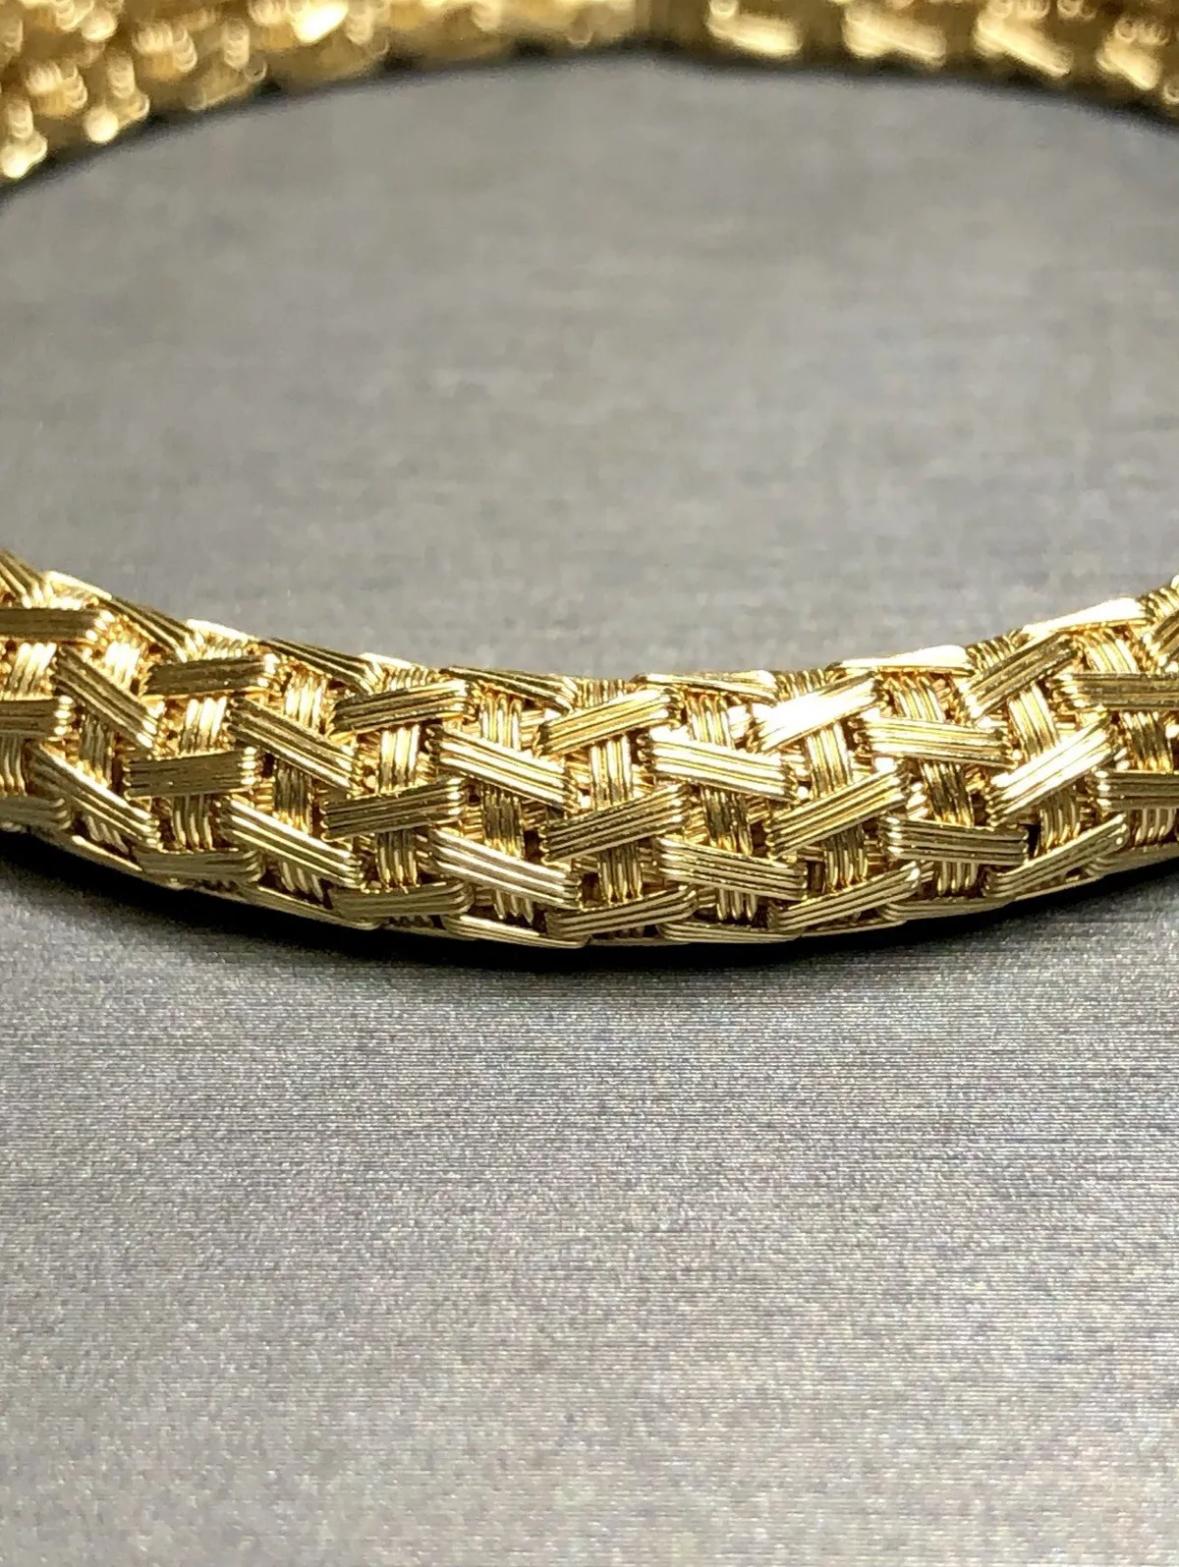 
A finely made bracelet crafted in heavy 18K yellow gold in a gorgeous, detailed weave design. Complete with box clasp and safety.


Dimensions/Weight:

Bracelet measures 7” long and .43” wide and weighs 37.6g.


Condition:

Bracelet is free of any